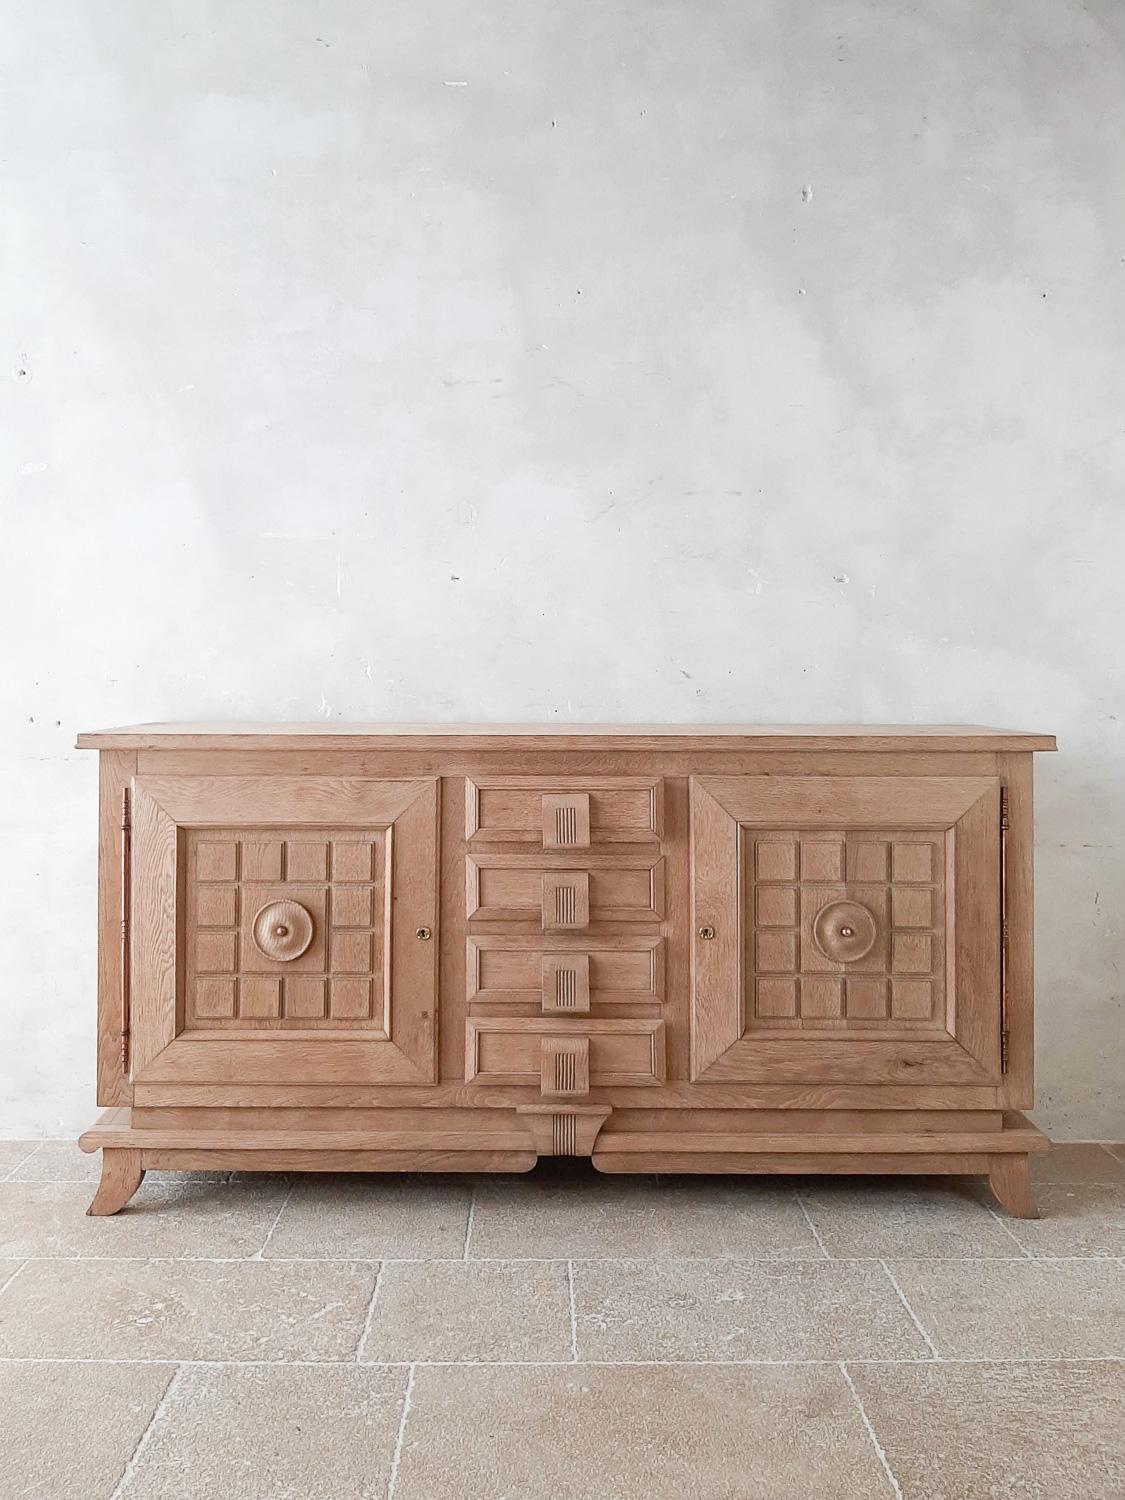 Bleached oak vintage credenza by Charles Dudouyt from the 1940s. Stunning midcentury sideboard with two paneled doors with the typical geometrical shapes of Charles Dudouyt and 4 drawers with wooden handles that are incorporated within the design.